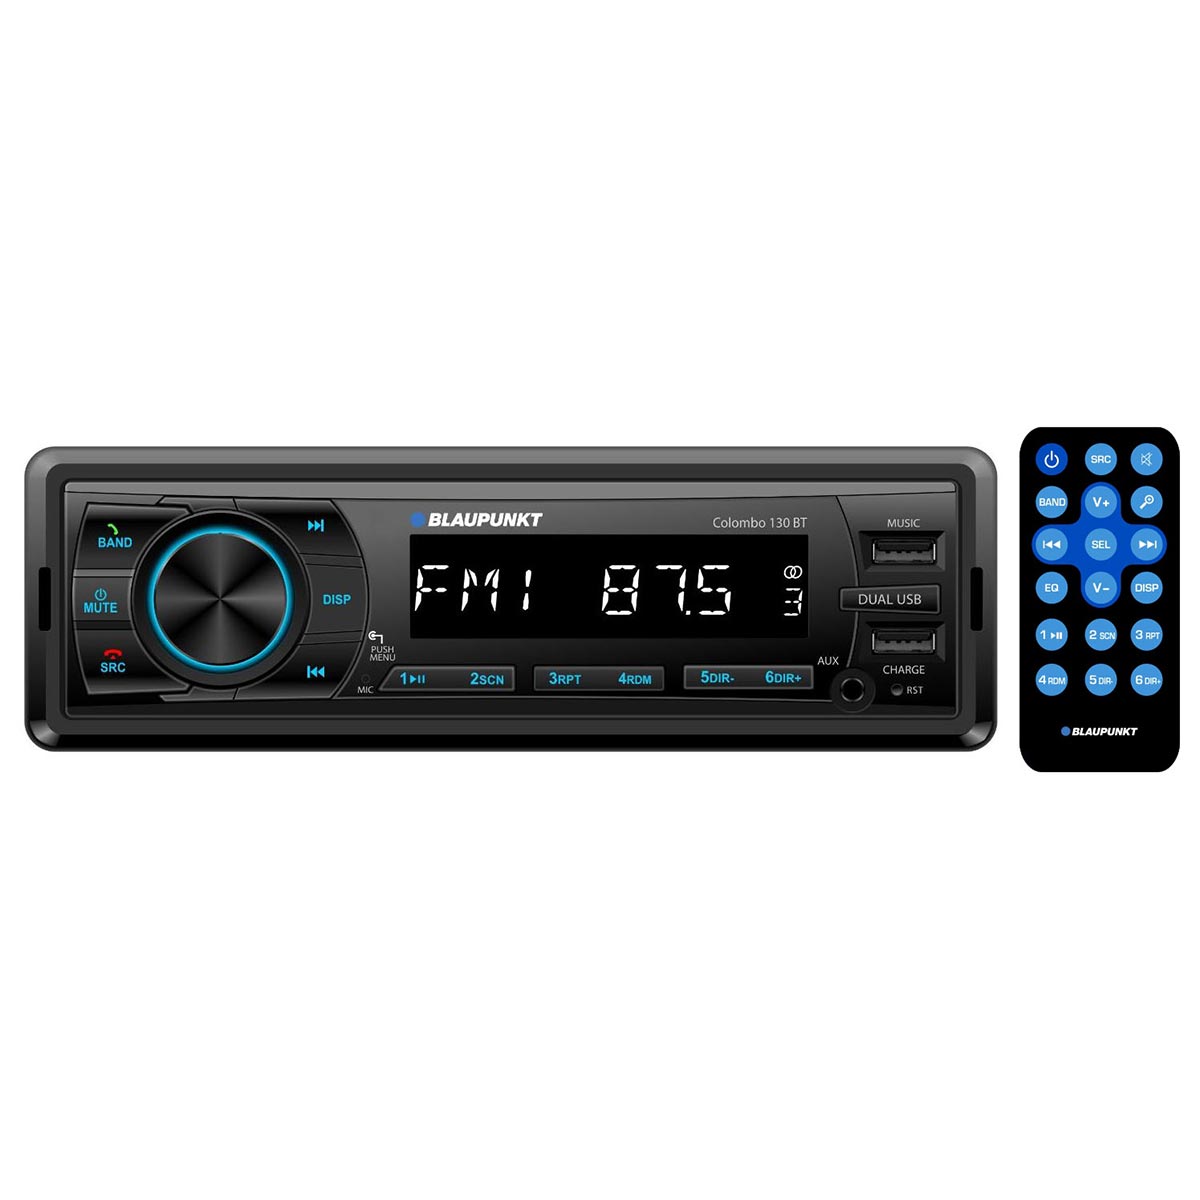 Picture of Blaupunkt COLOMBO130 Single DIN Mechless AM-FM Receiver with Bluetooth USB Input & Remote